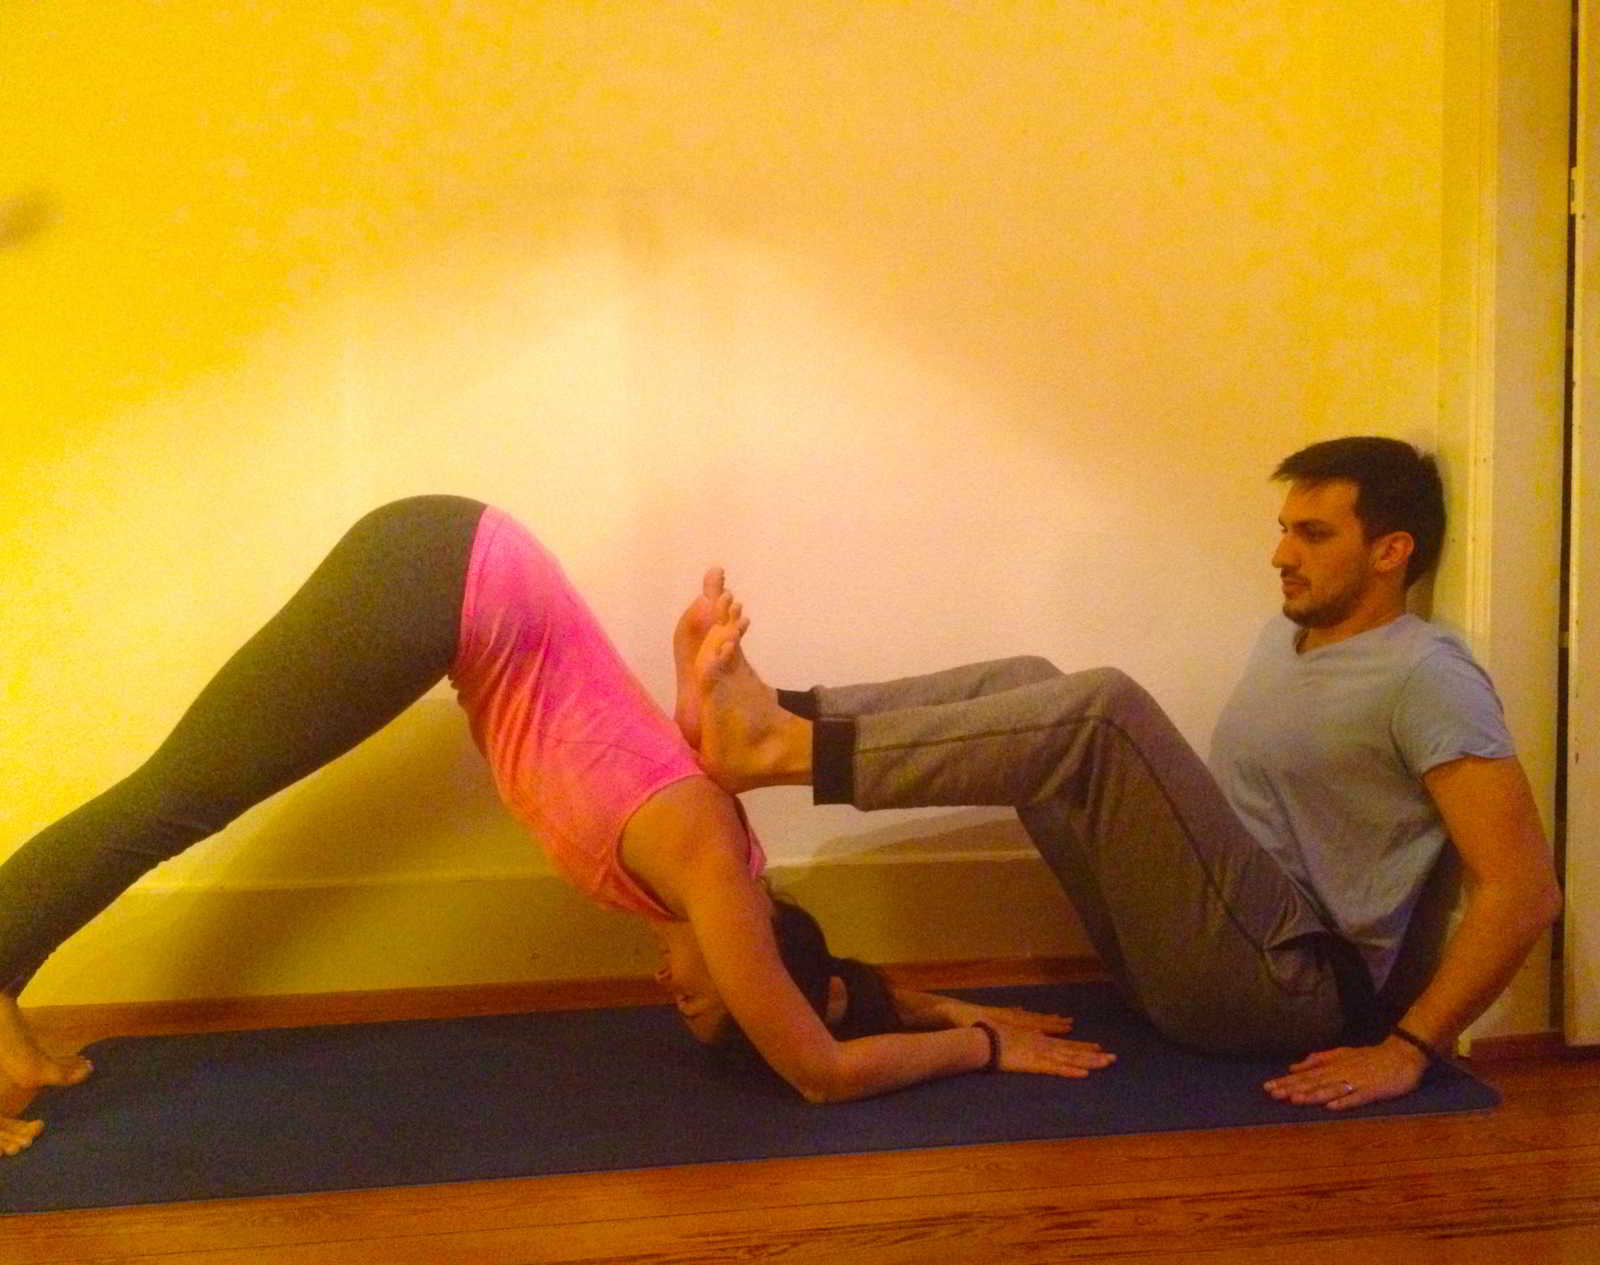 Partner Yoga Poses and Stretches for Beginners | Yogalates with Rashmi  Ramesh - YouTube